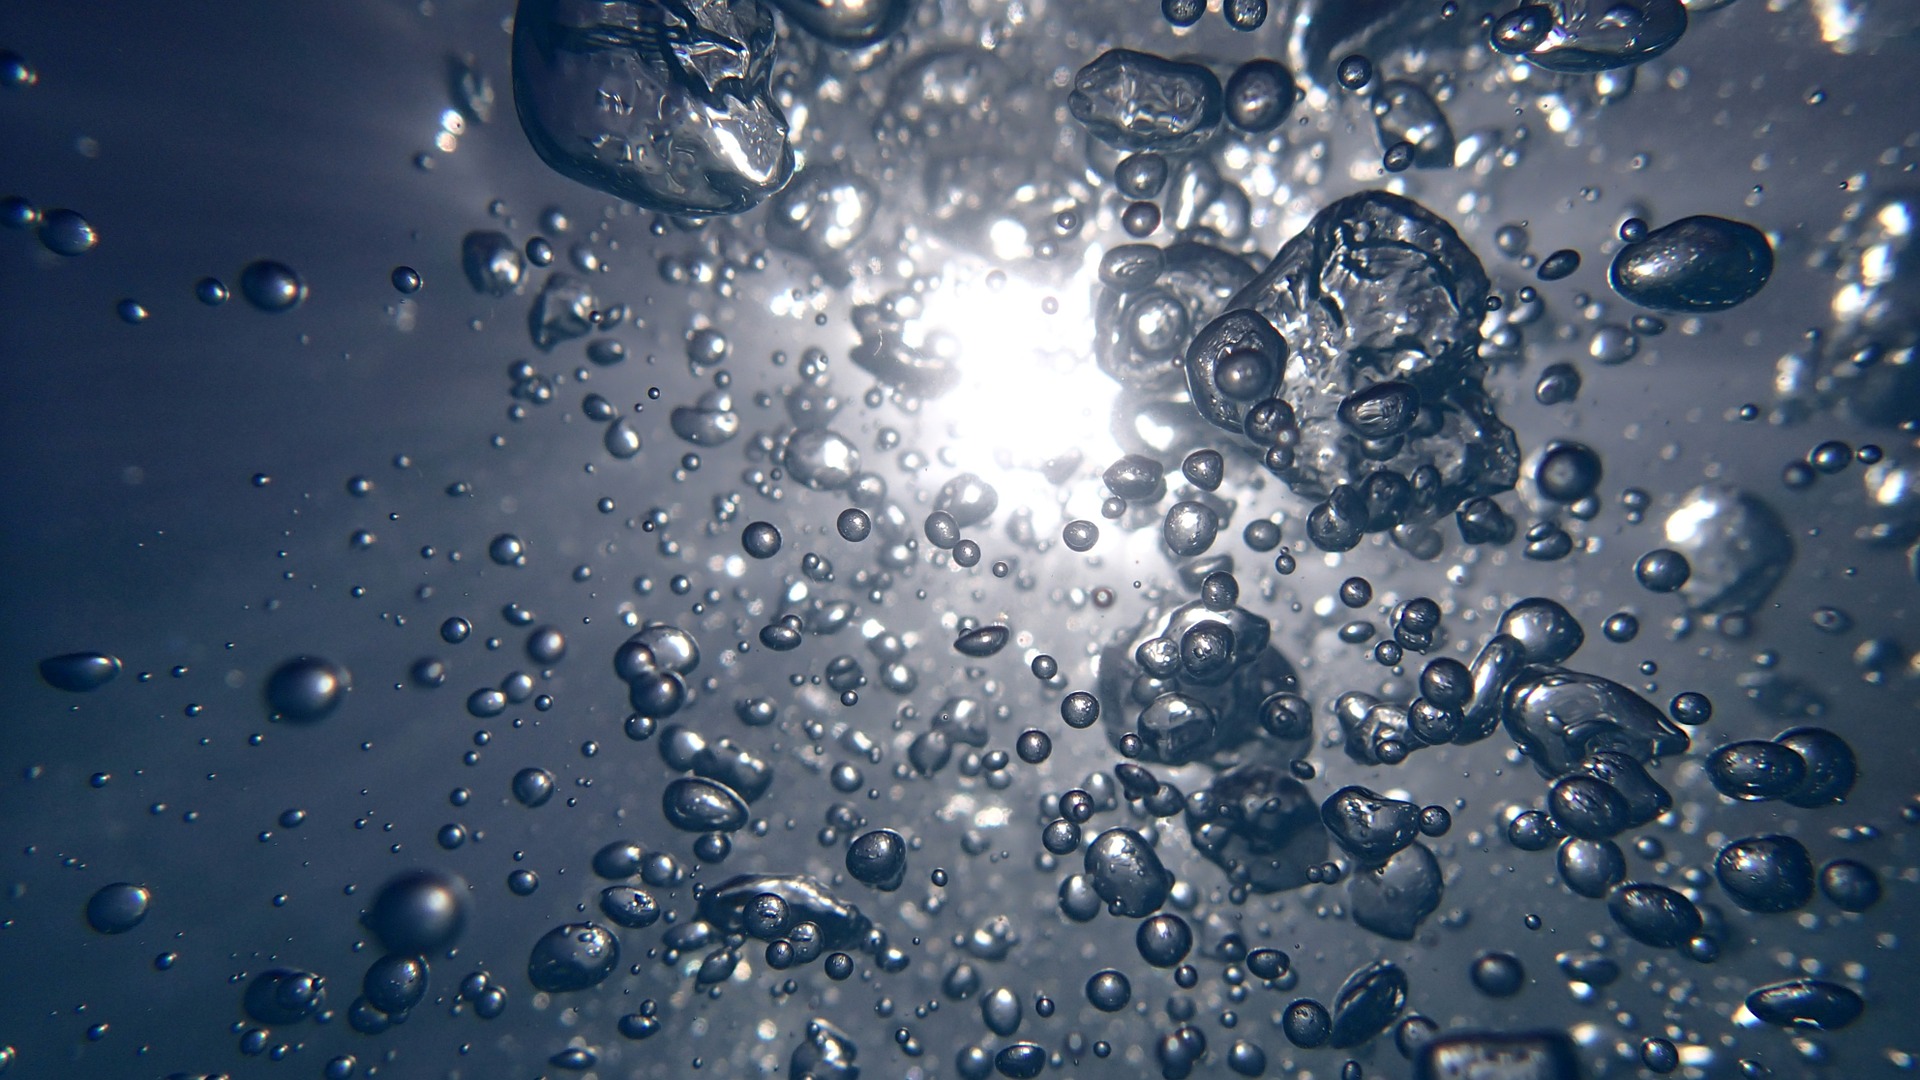 Air bubbles under water